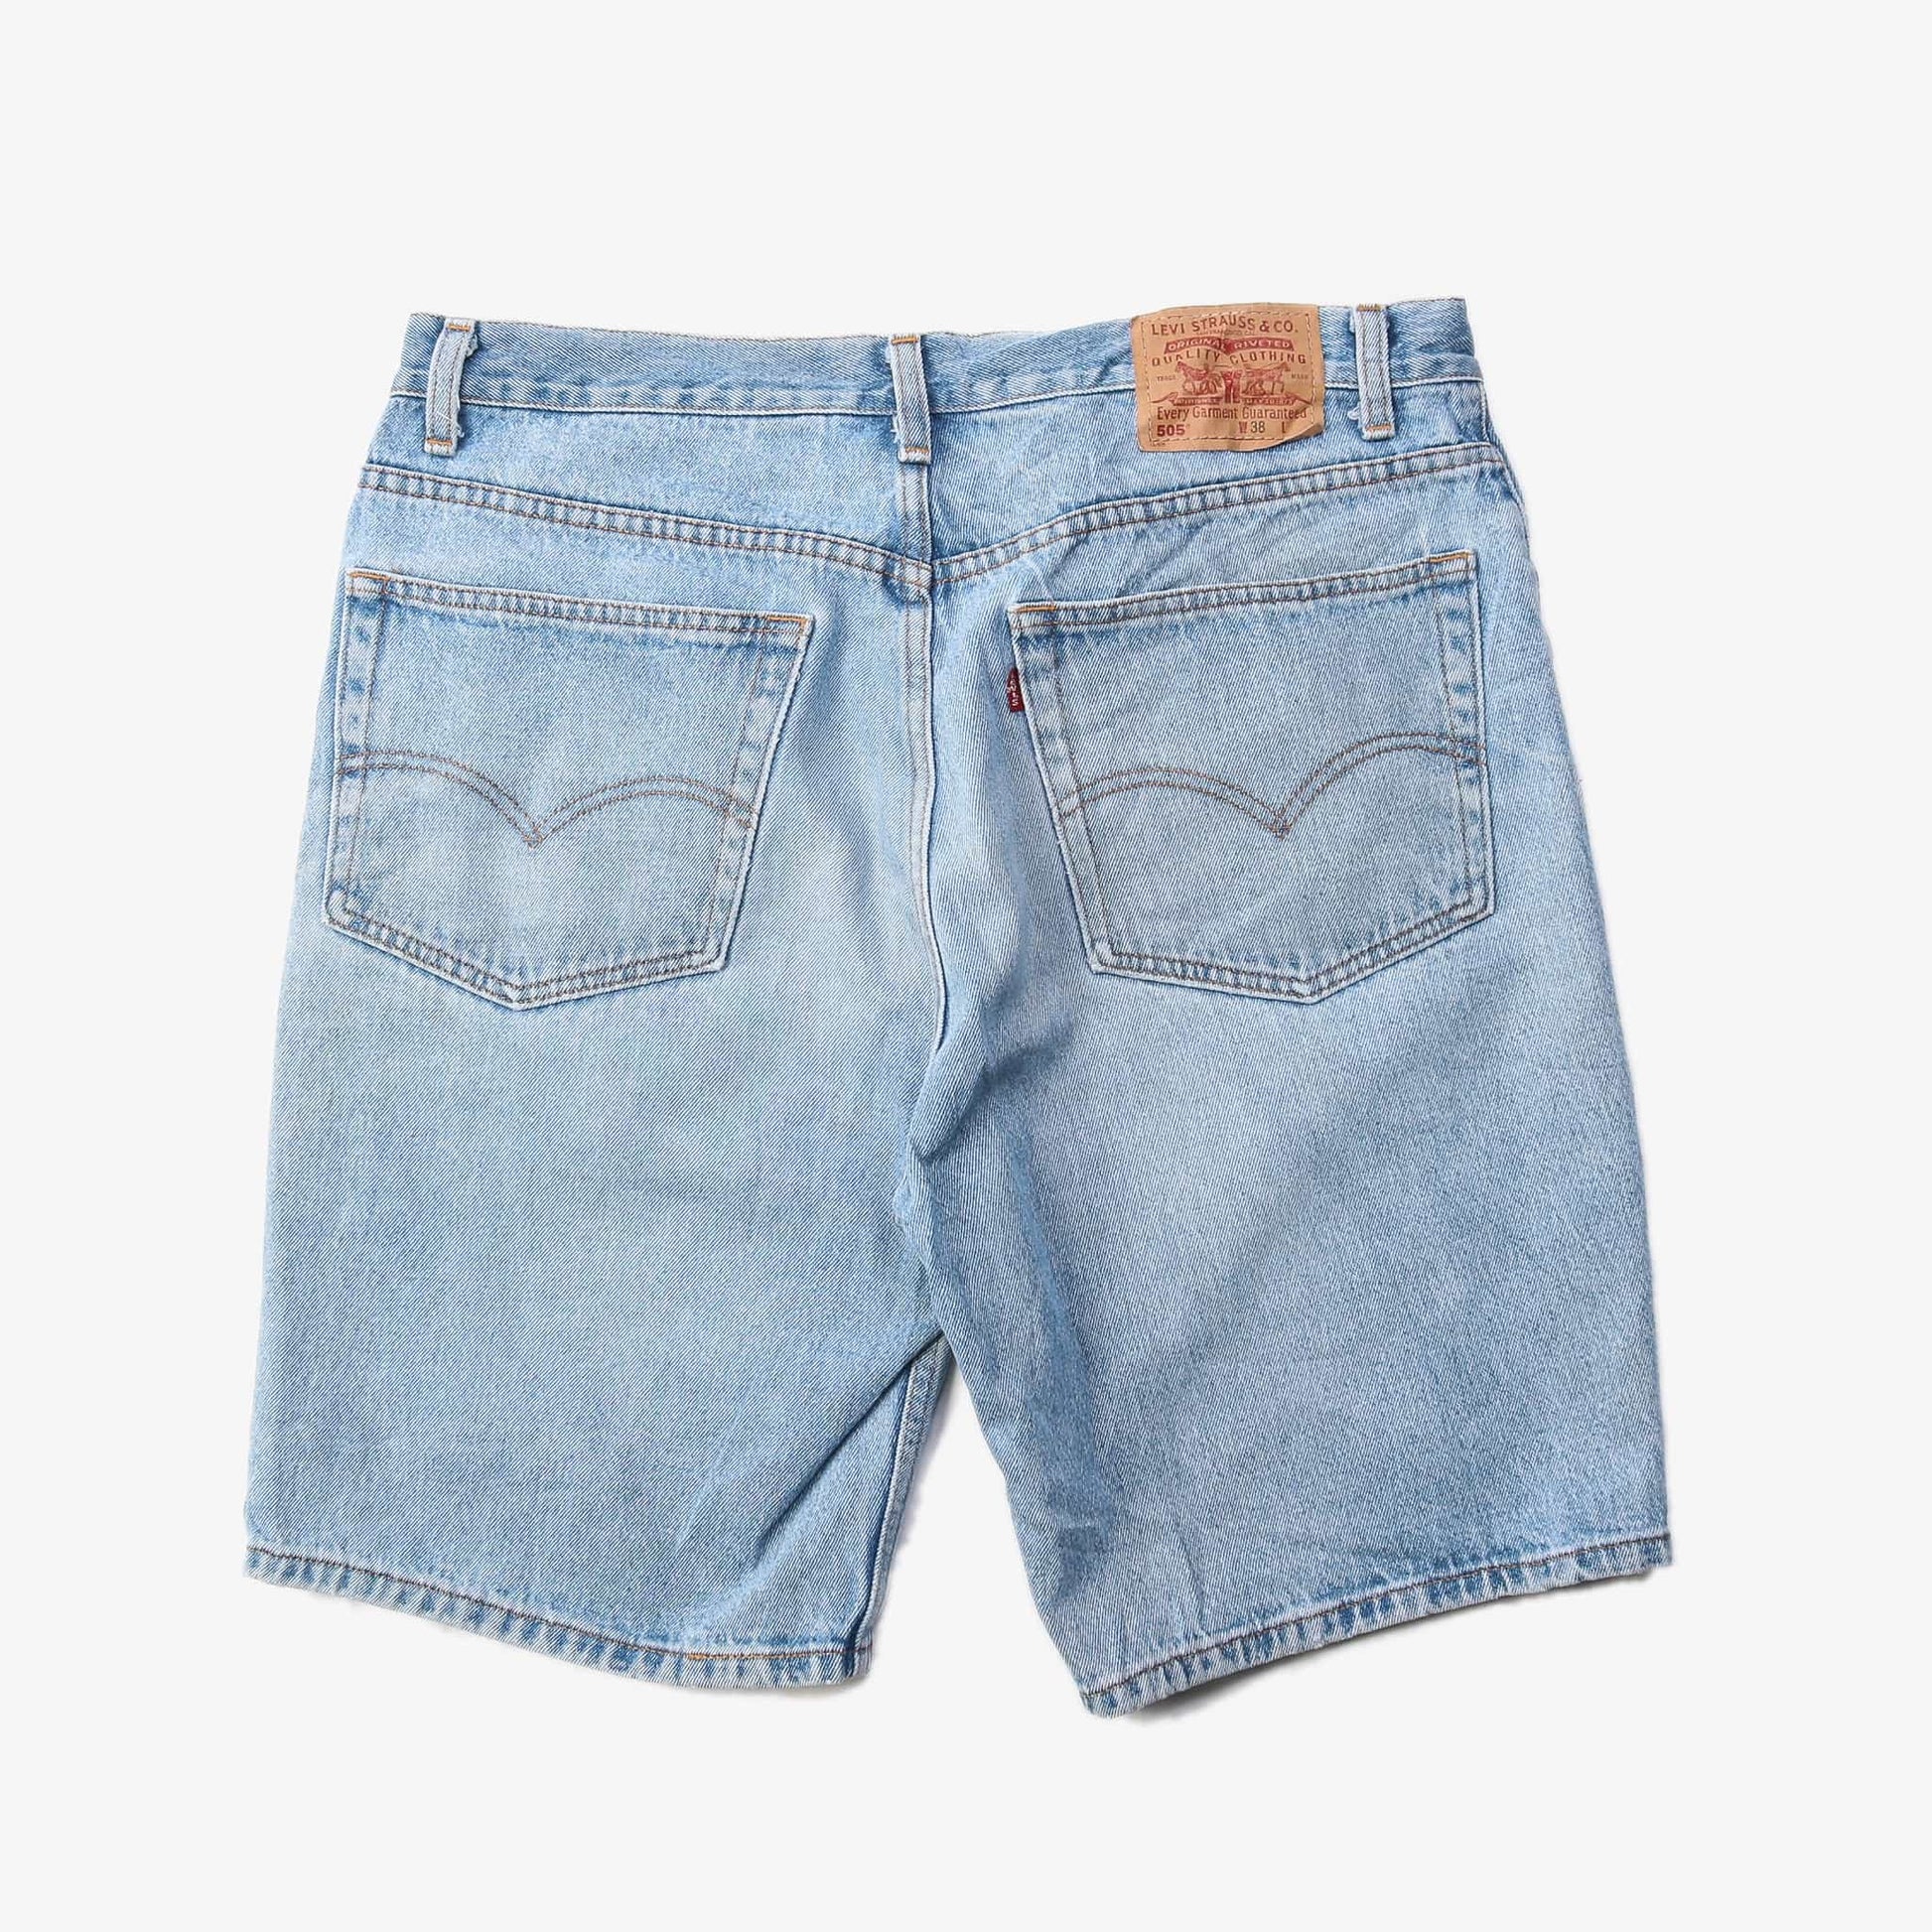 Vintage 505 Shorts - 38" - American Madness